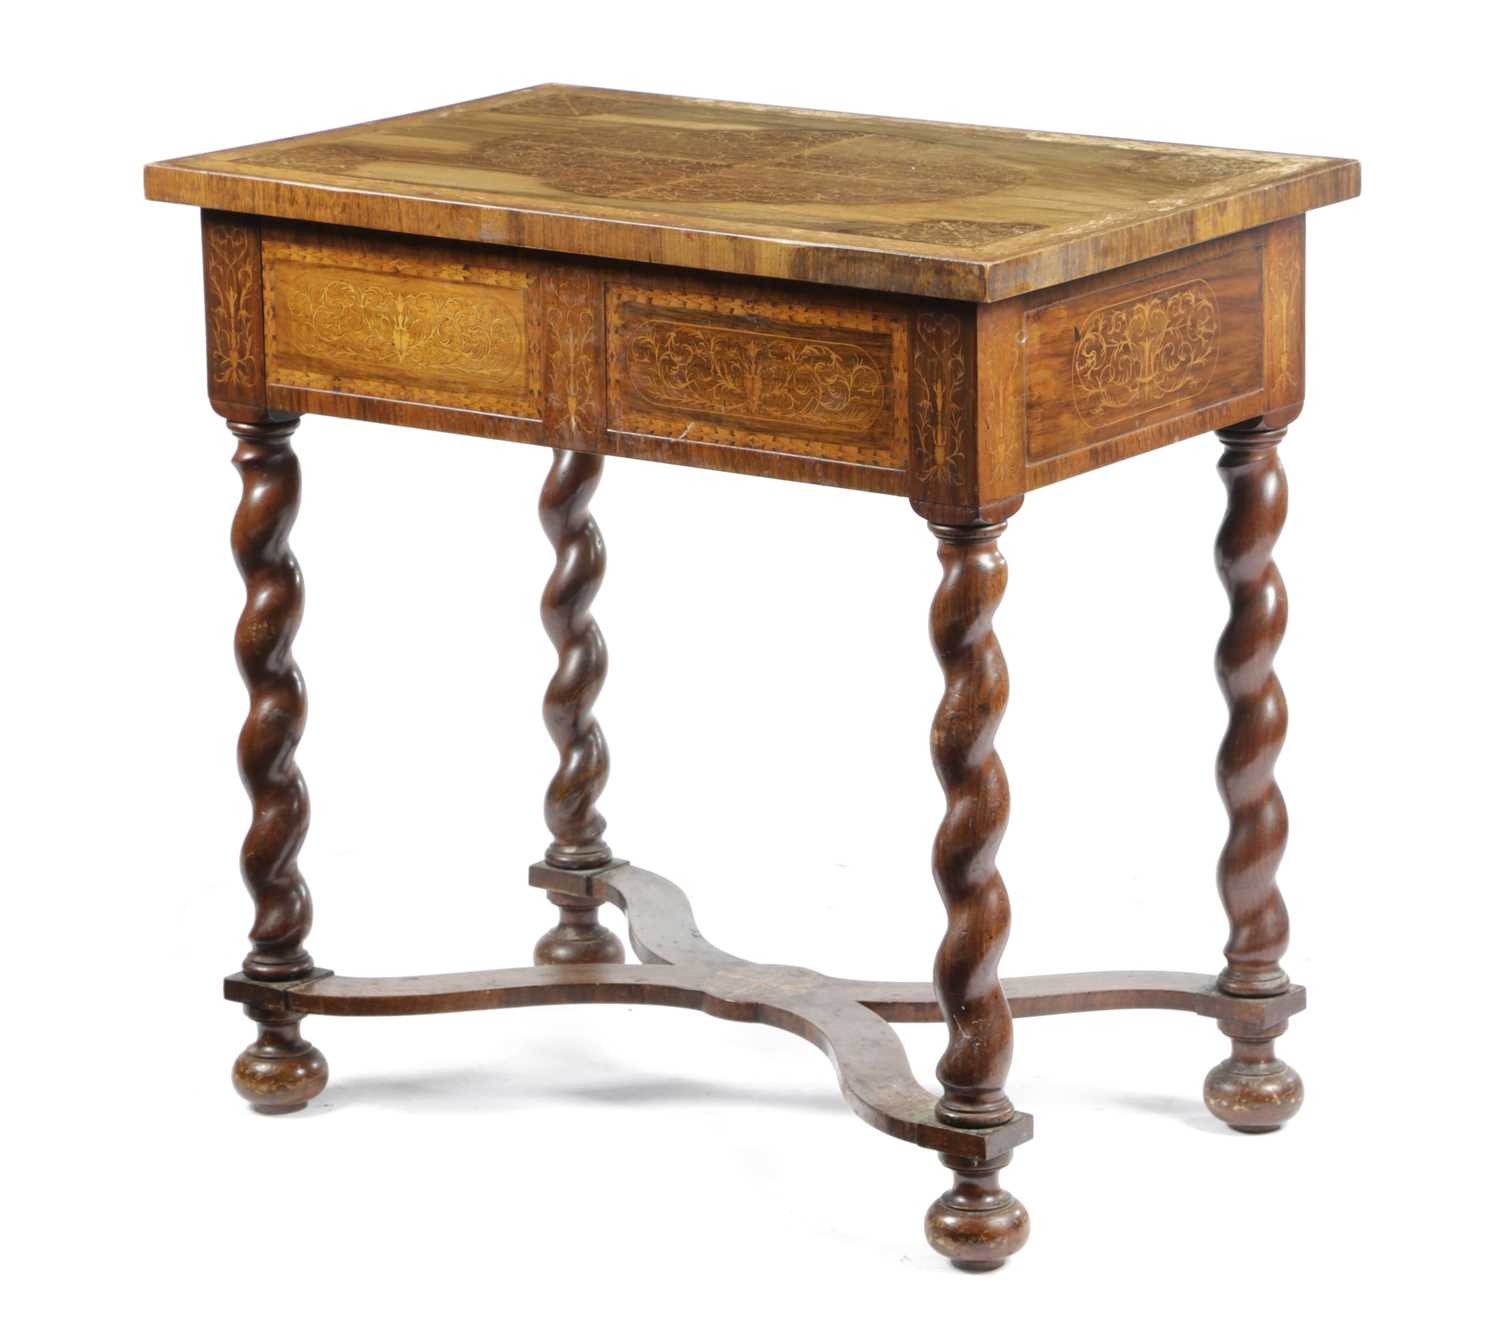 A WALNUT AND SEAWEED MARQUETRY SIDE TABLE IN WILLAM AND MARY STYLE, 19TH CENTURY the top inlaid with